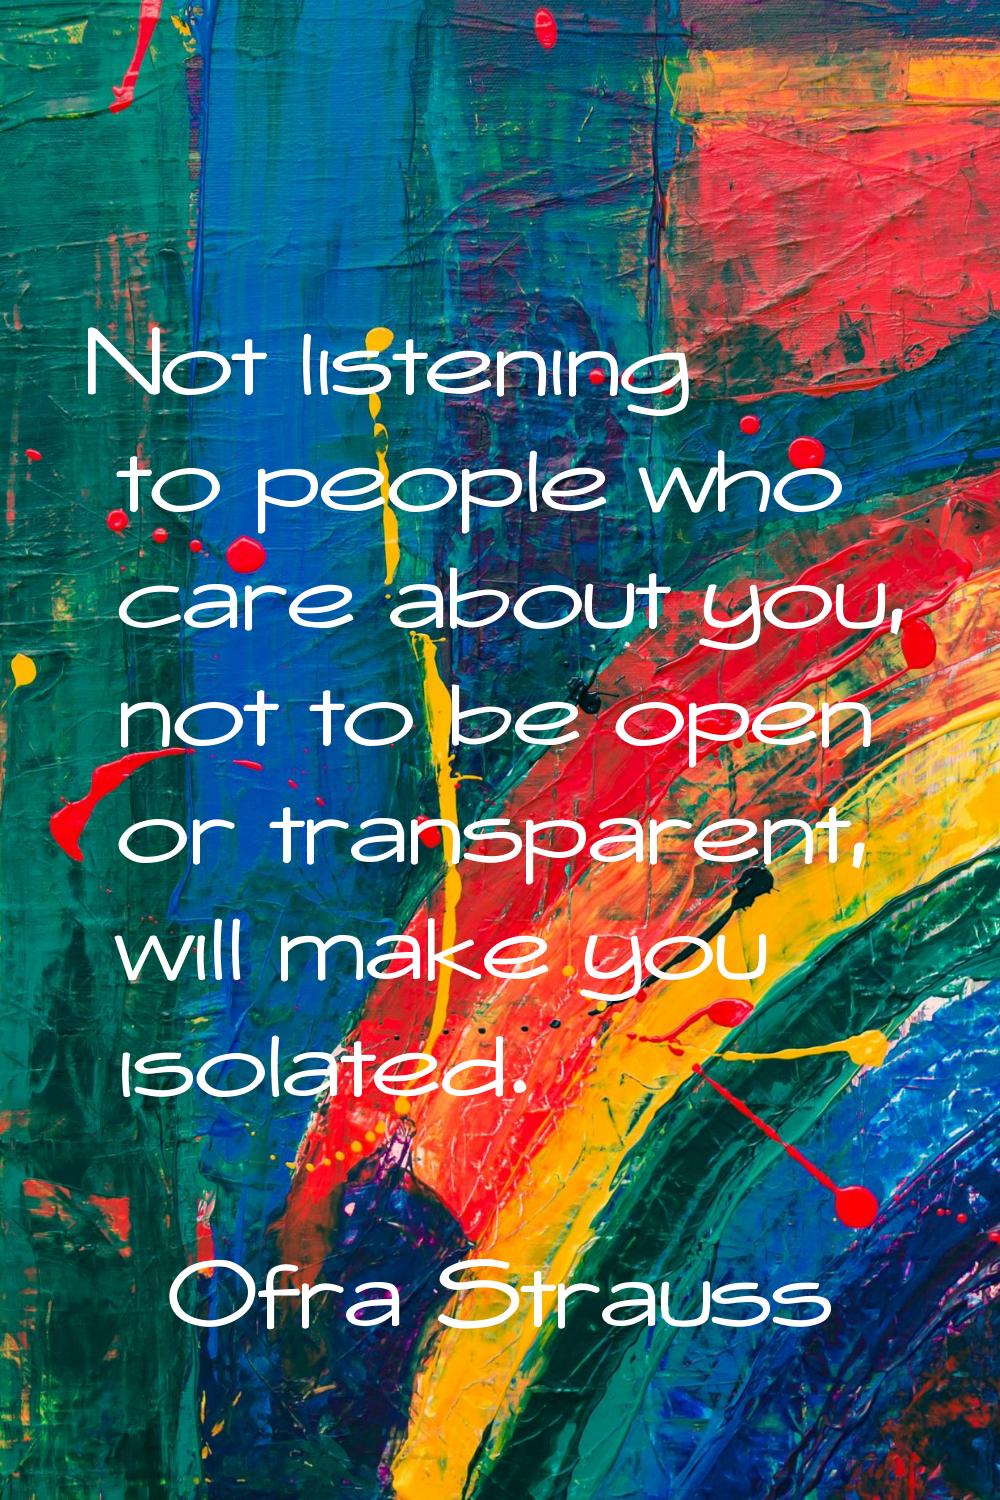 Not listening to people who care about you, not to be open or transparent, will make you isolated.